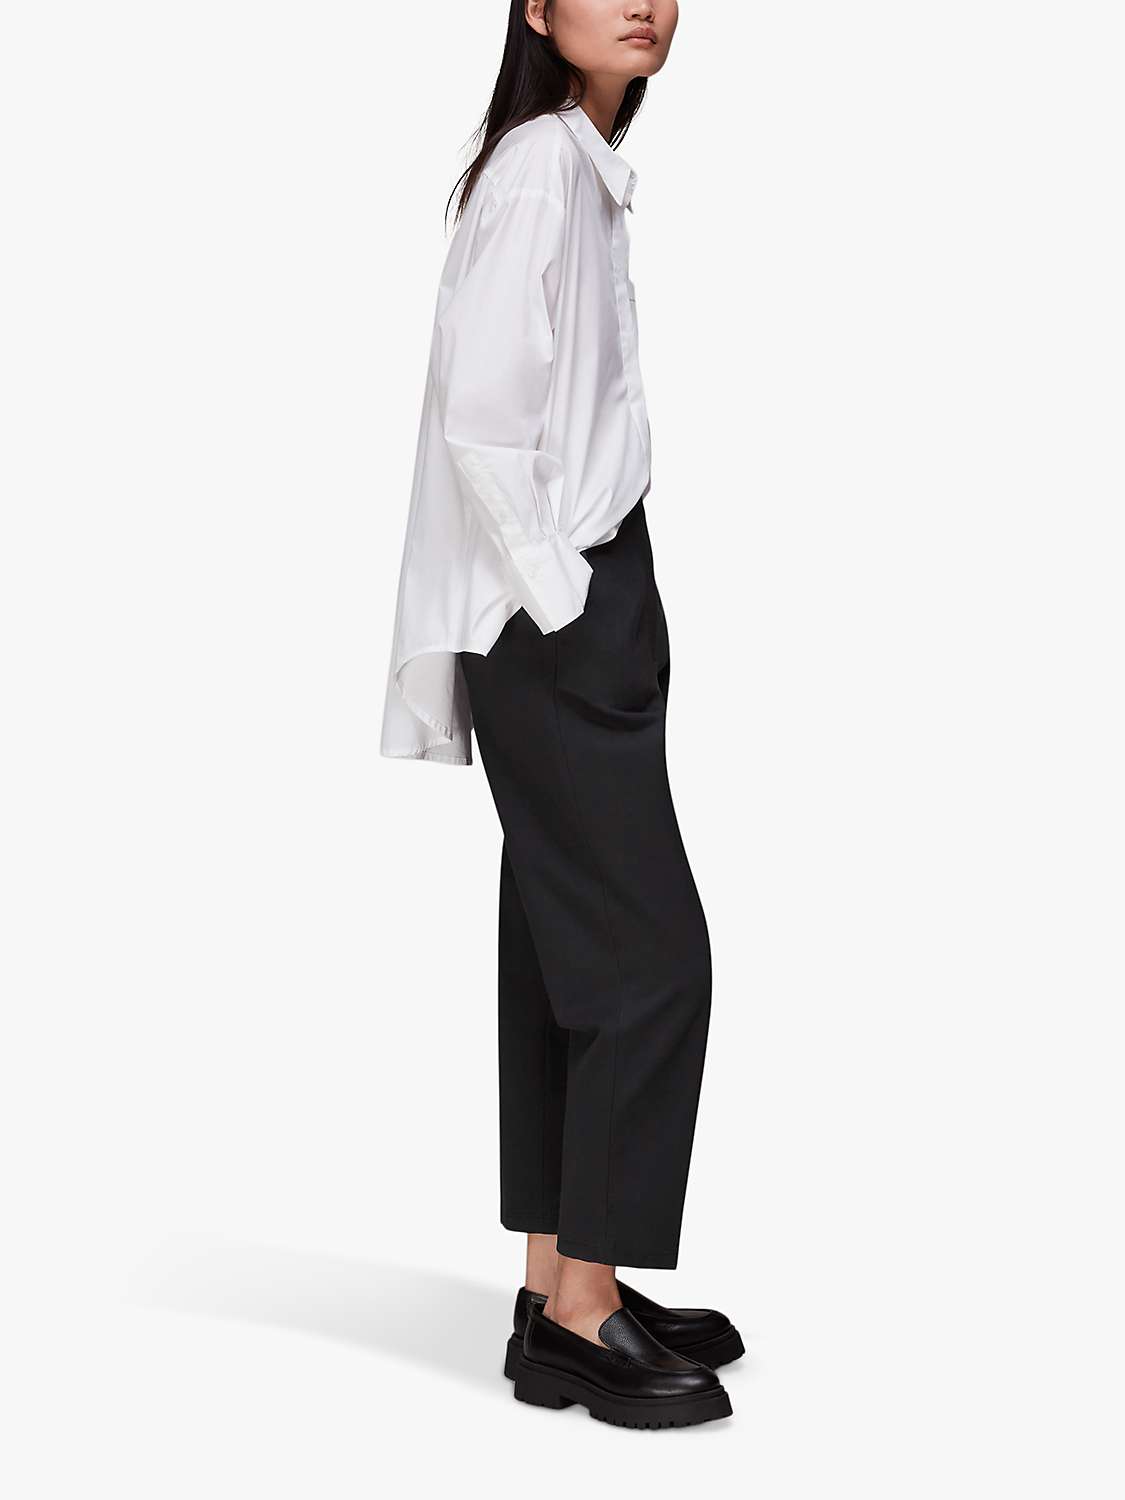 Buy Whistles Lila Ponte Trousers, Black Online at johnlewis.com